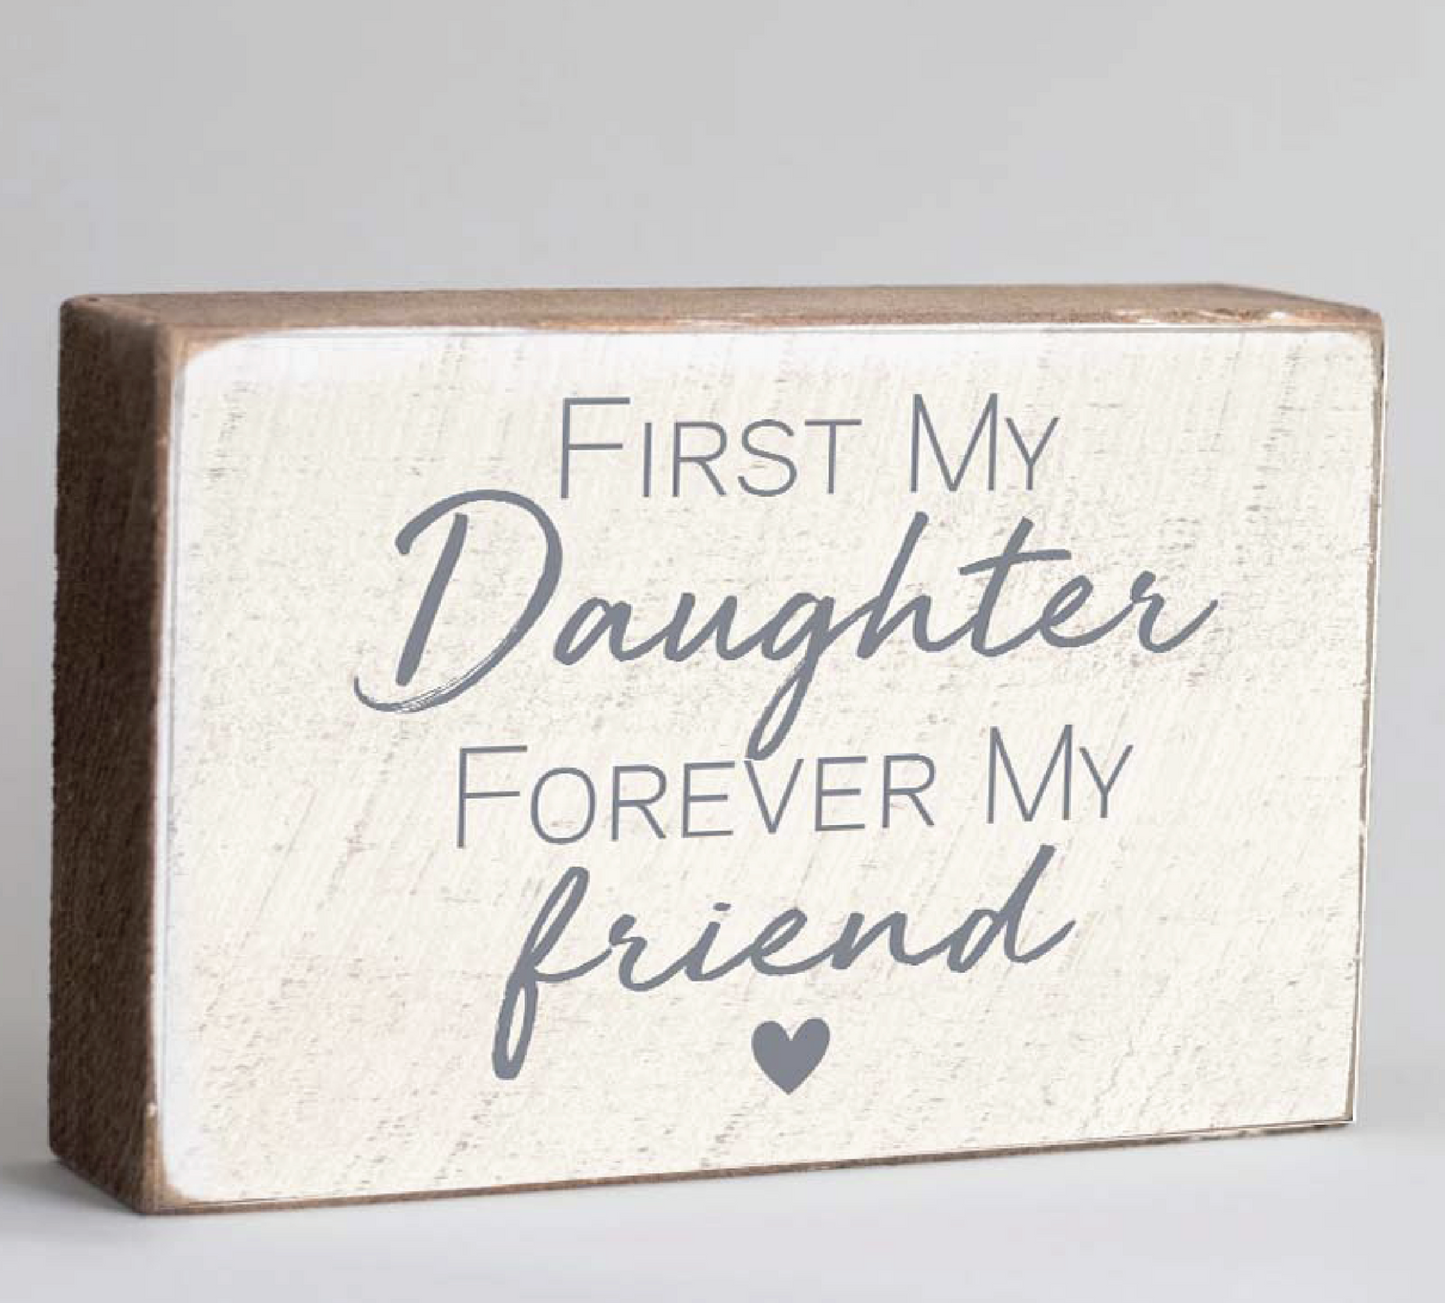 FIRST MY DAUGHTER FOREVER MY FRIEND WOODEN BLOCK